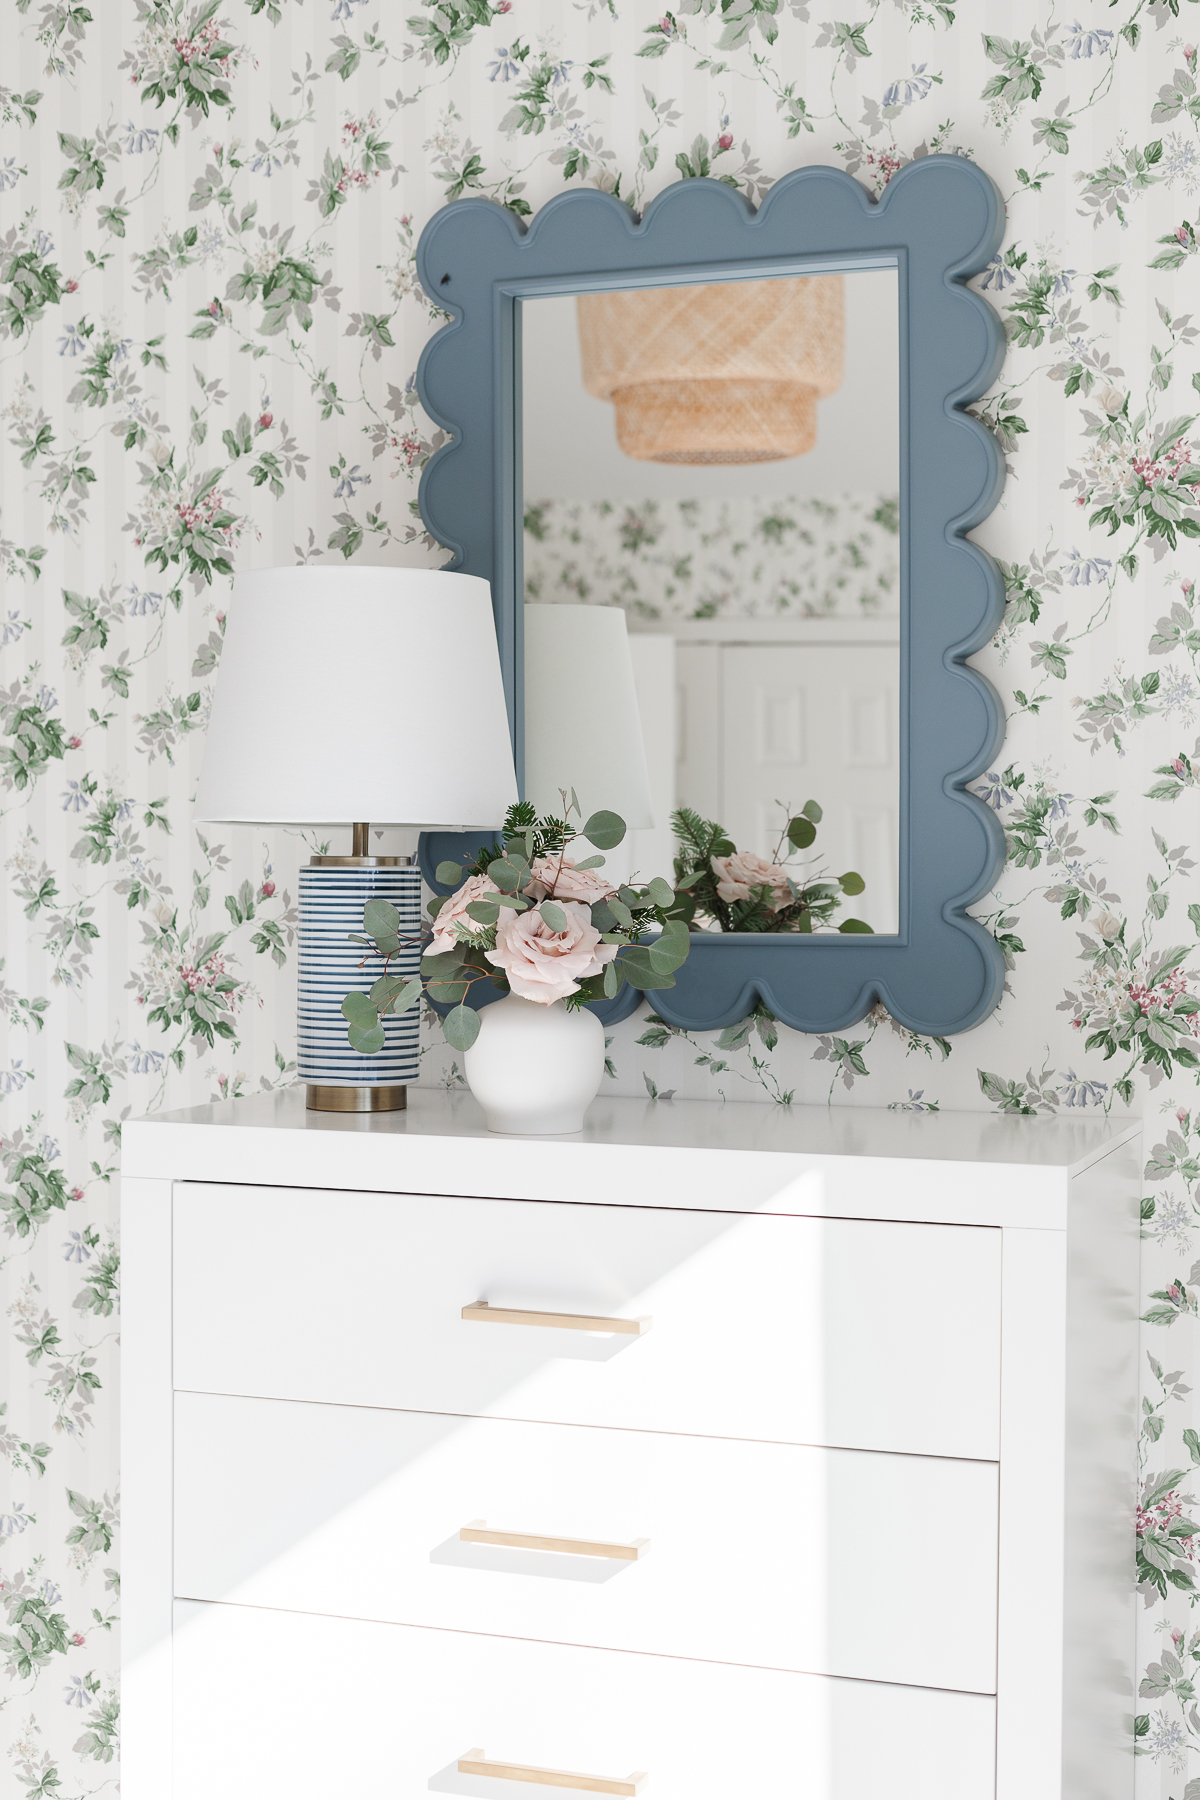 A bedroom dresser with a floral wallpaper and a mirror.